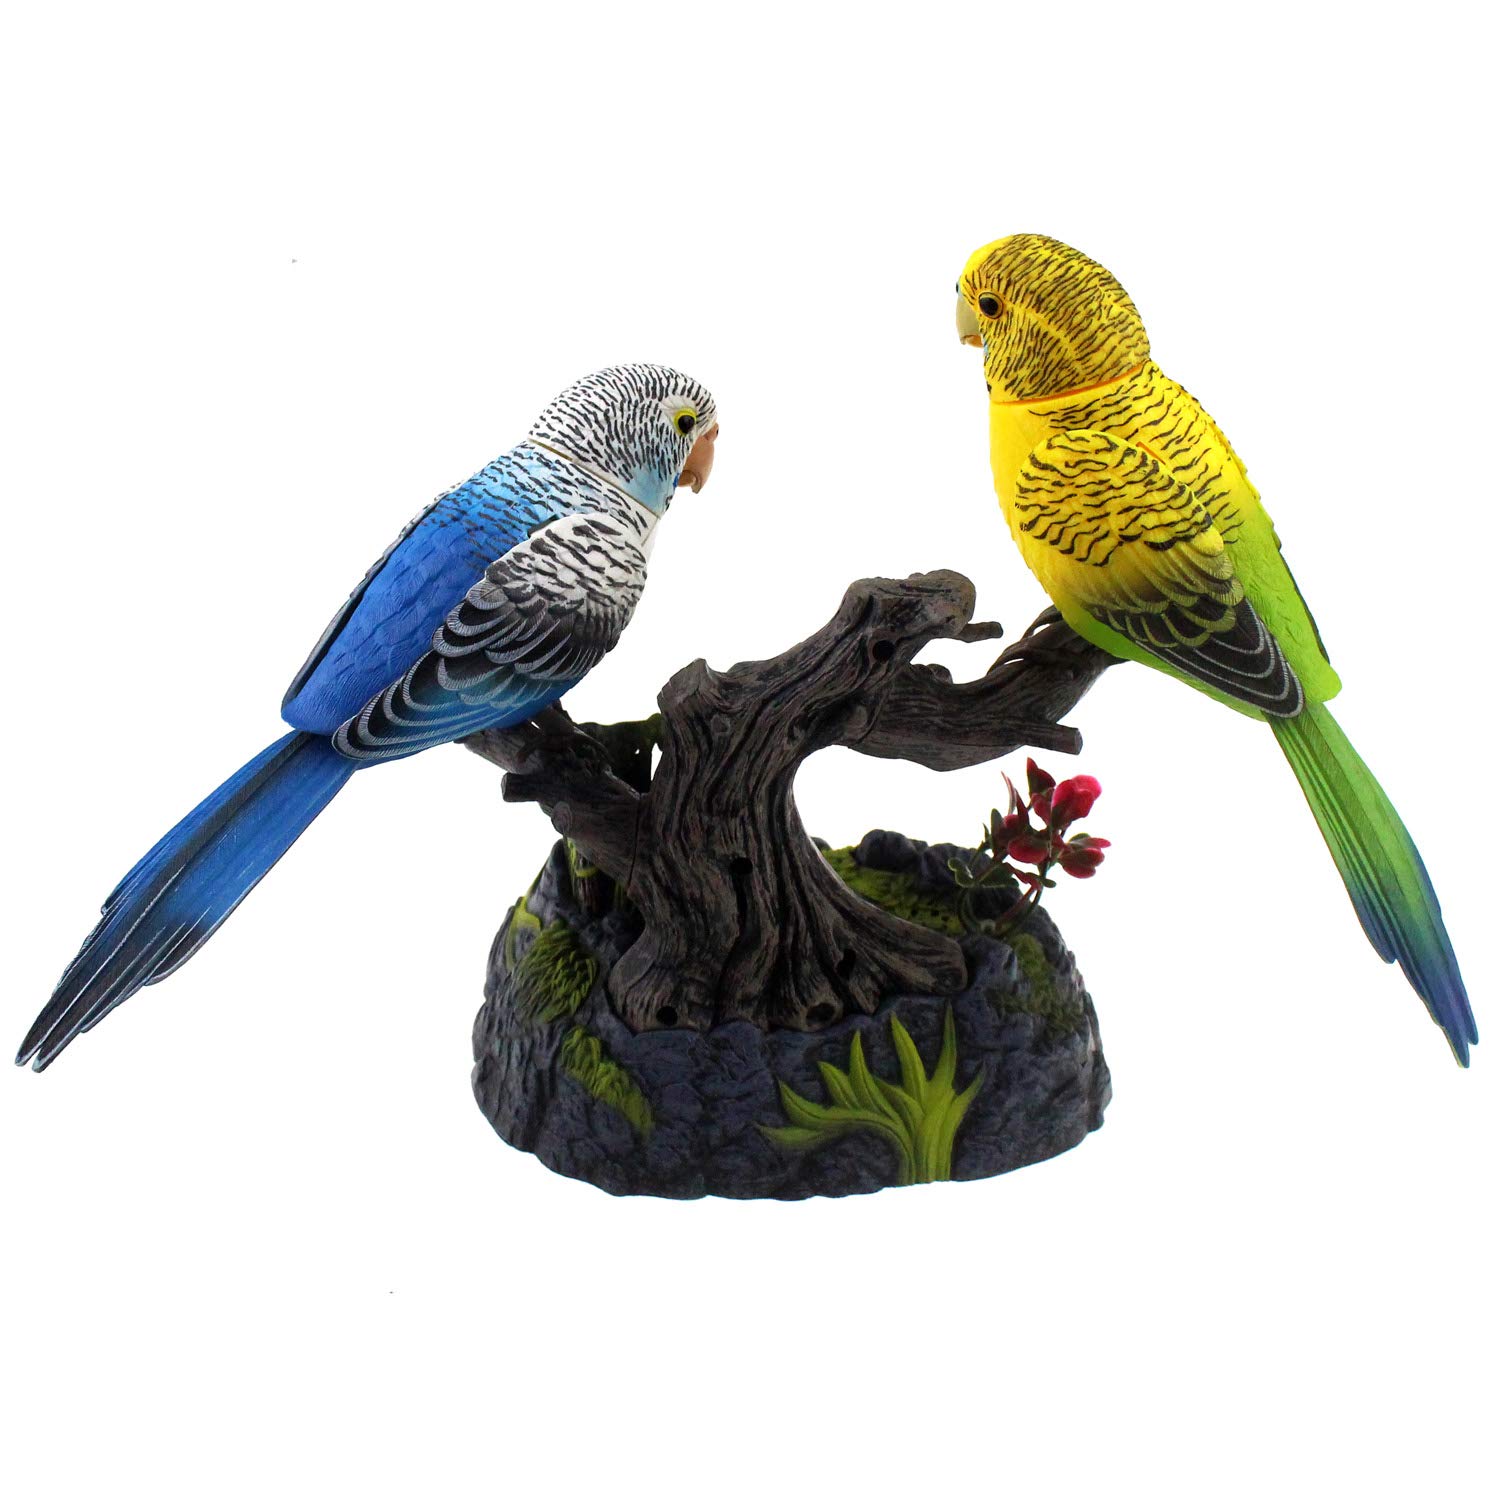 Tipmant Talking Parrots Birds Electronic Pets Office Home Decoration Recording & Playback Function Pen Holders Kids Toys Christmas Birthday Gifts